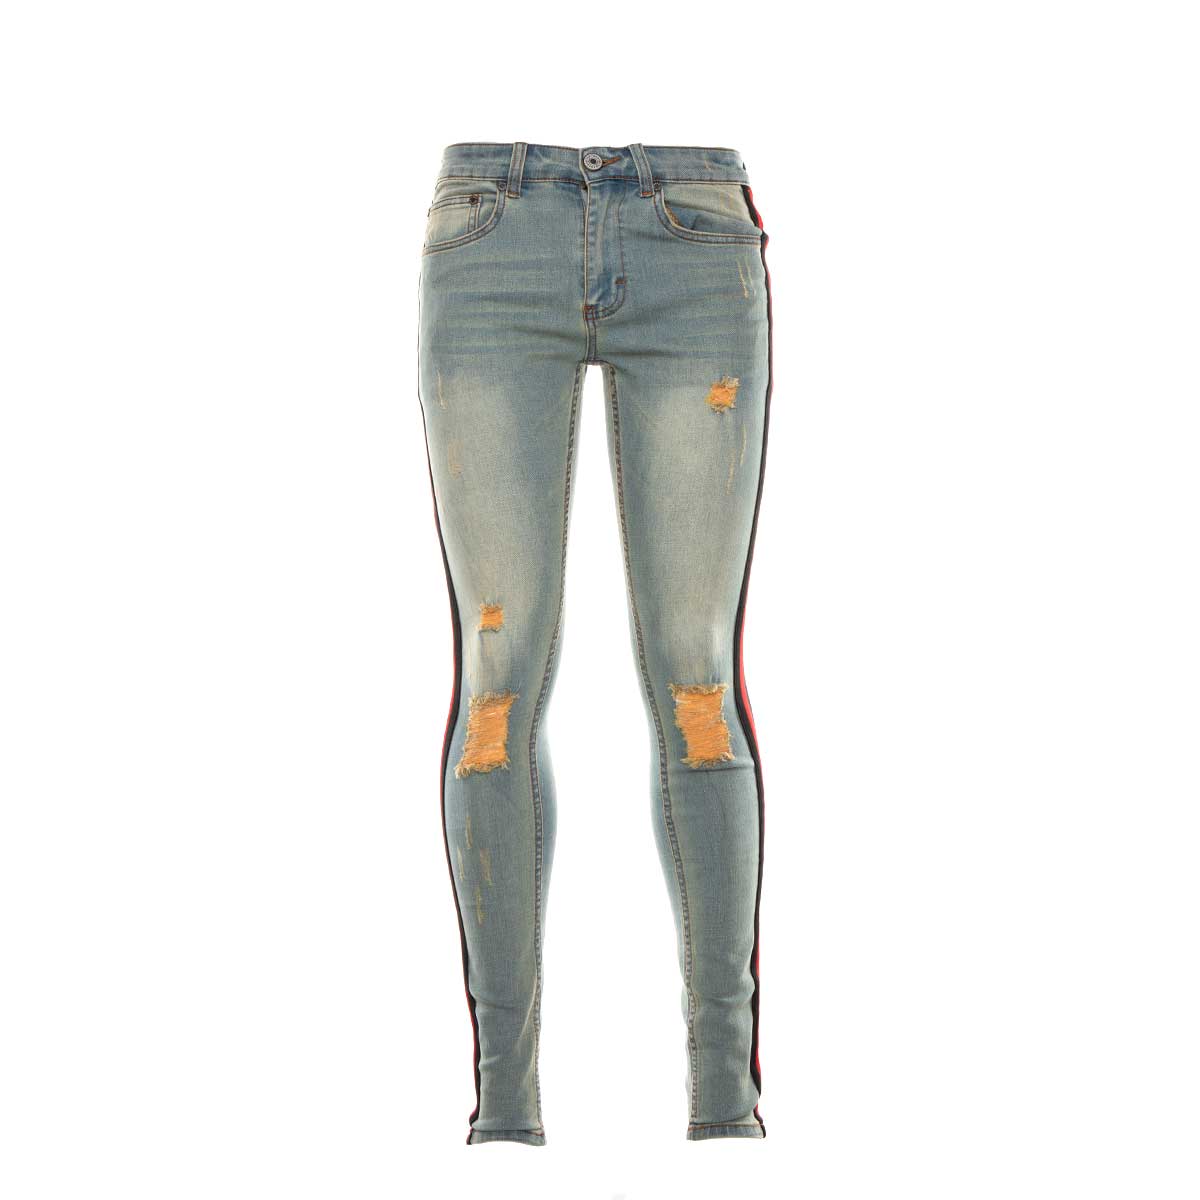 Serenede "Double Helix" Jeans